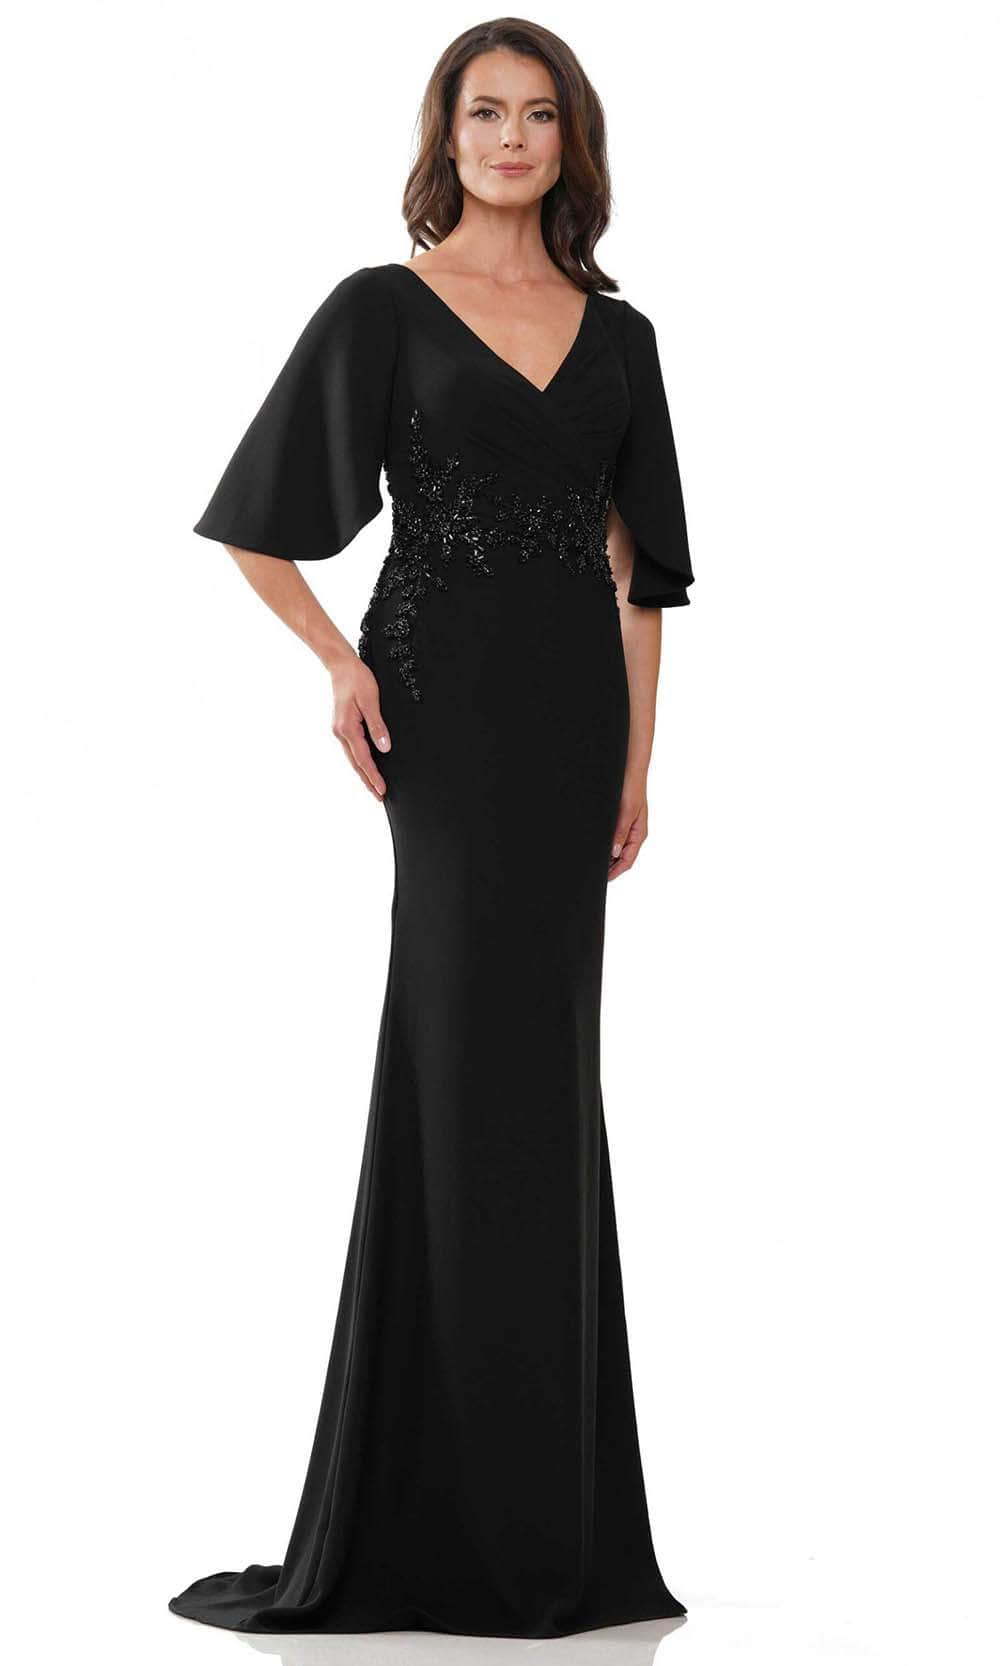 Image of Marsoni by Colors MV1248 - Bead Embellished Mermaid Evening Gown